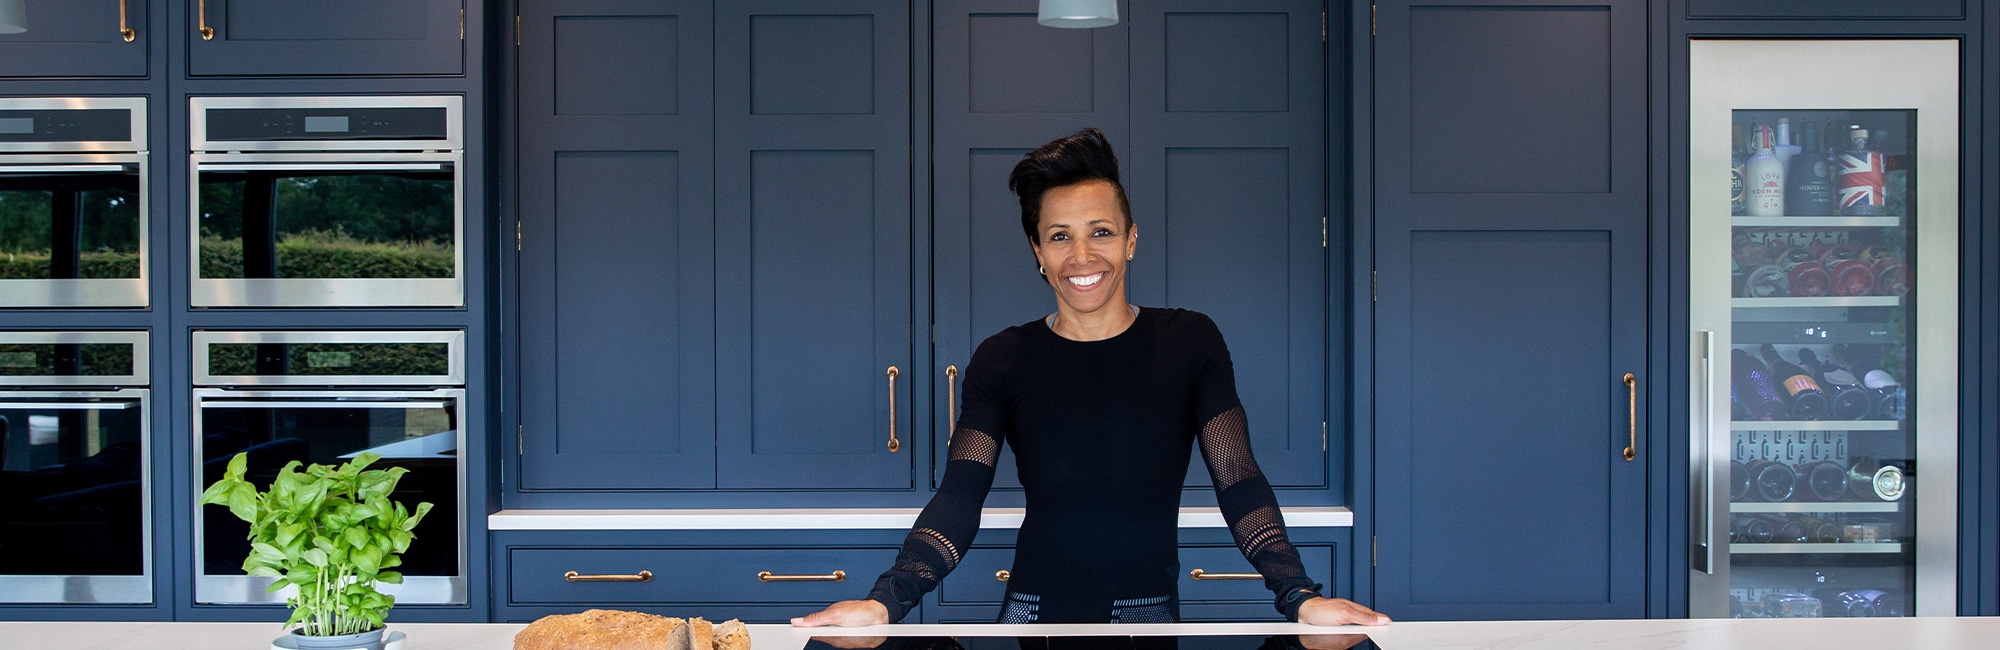 Kelly Holmes Kitchen Make-over Ovens and Wine Cabinet